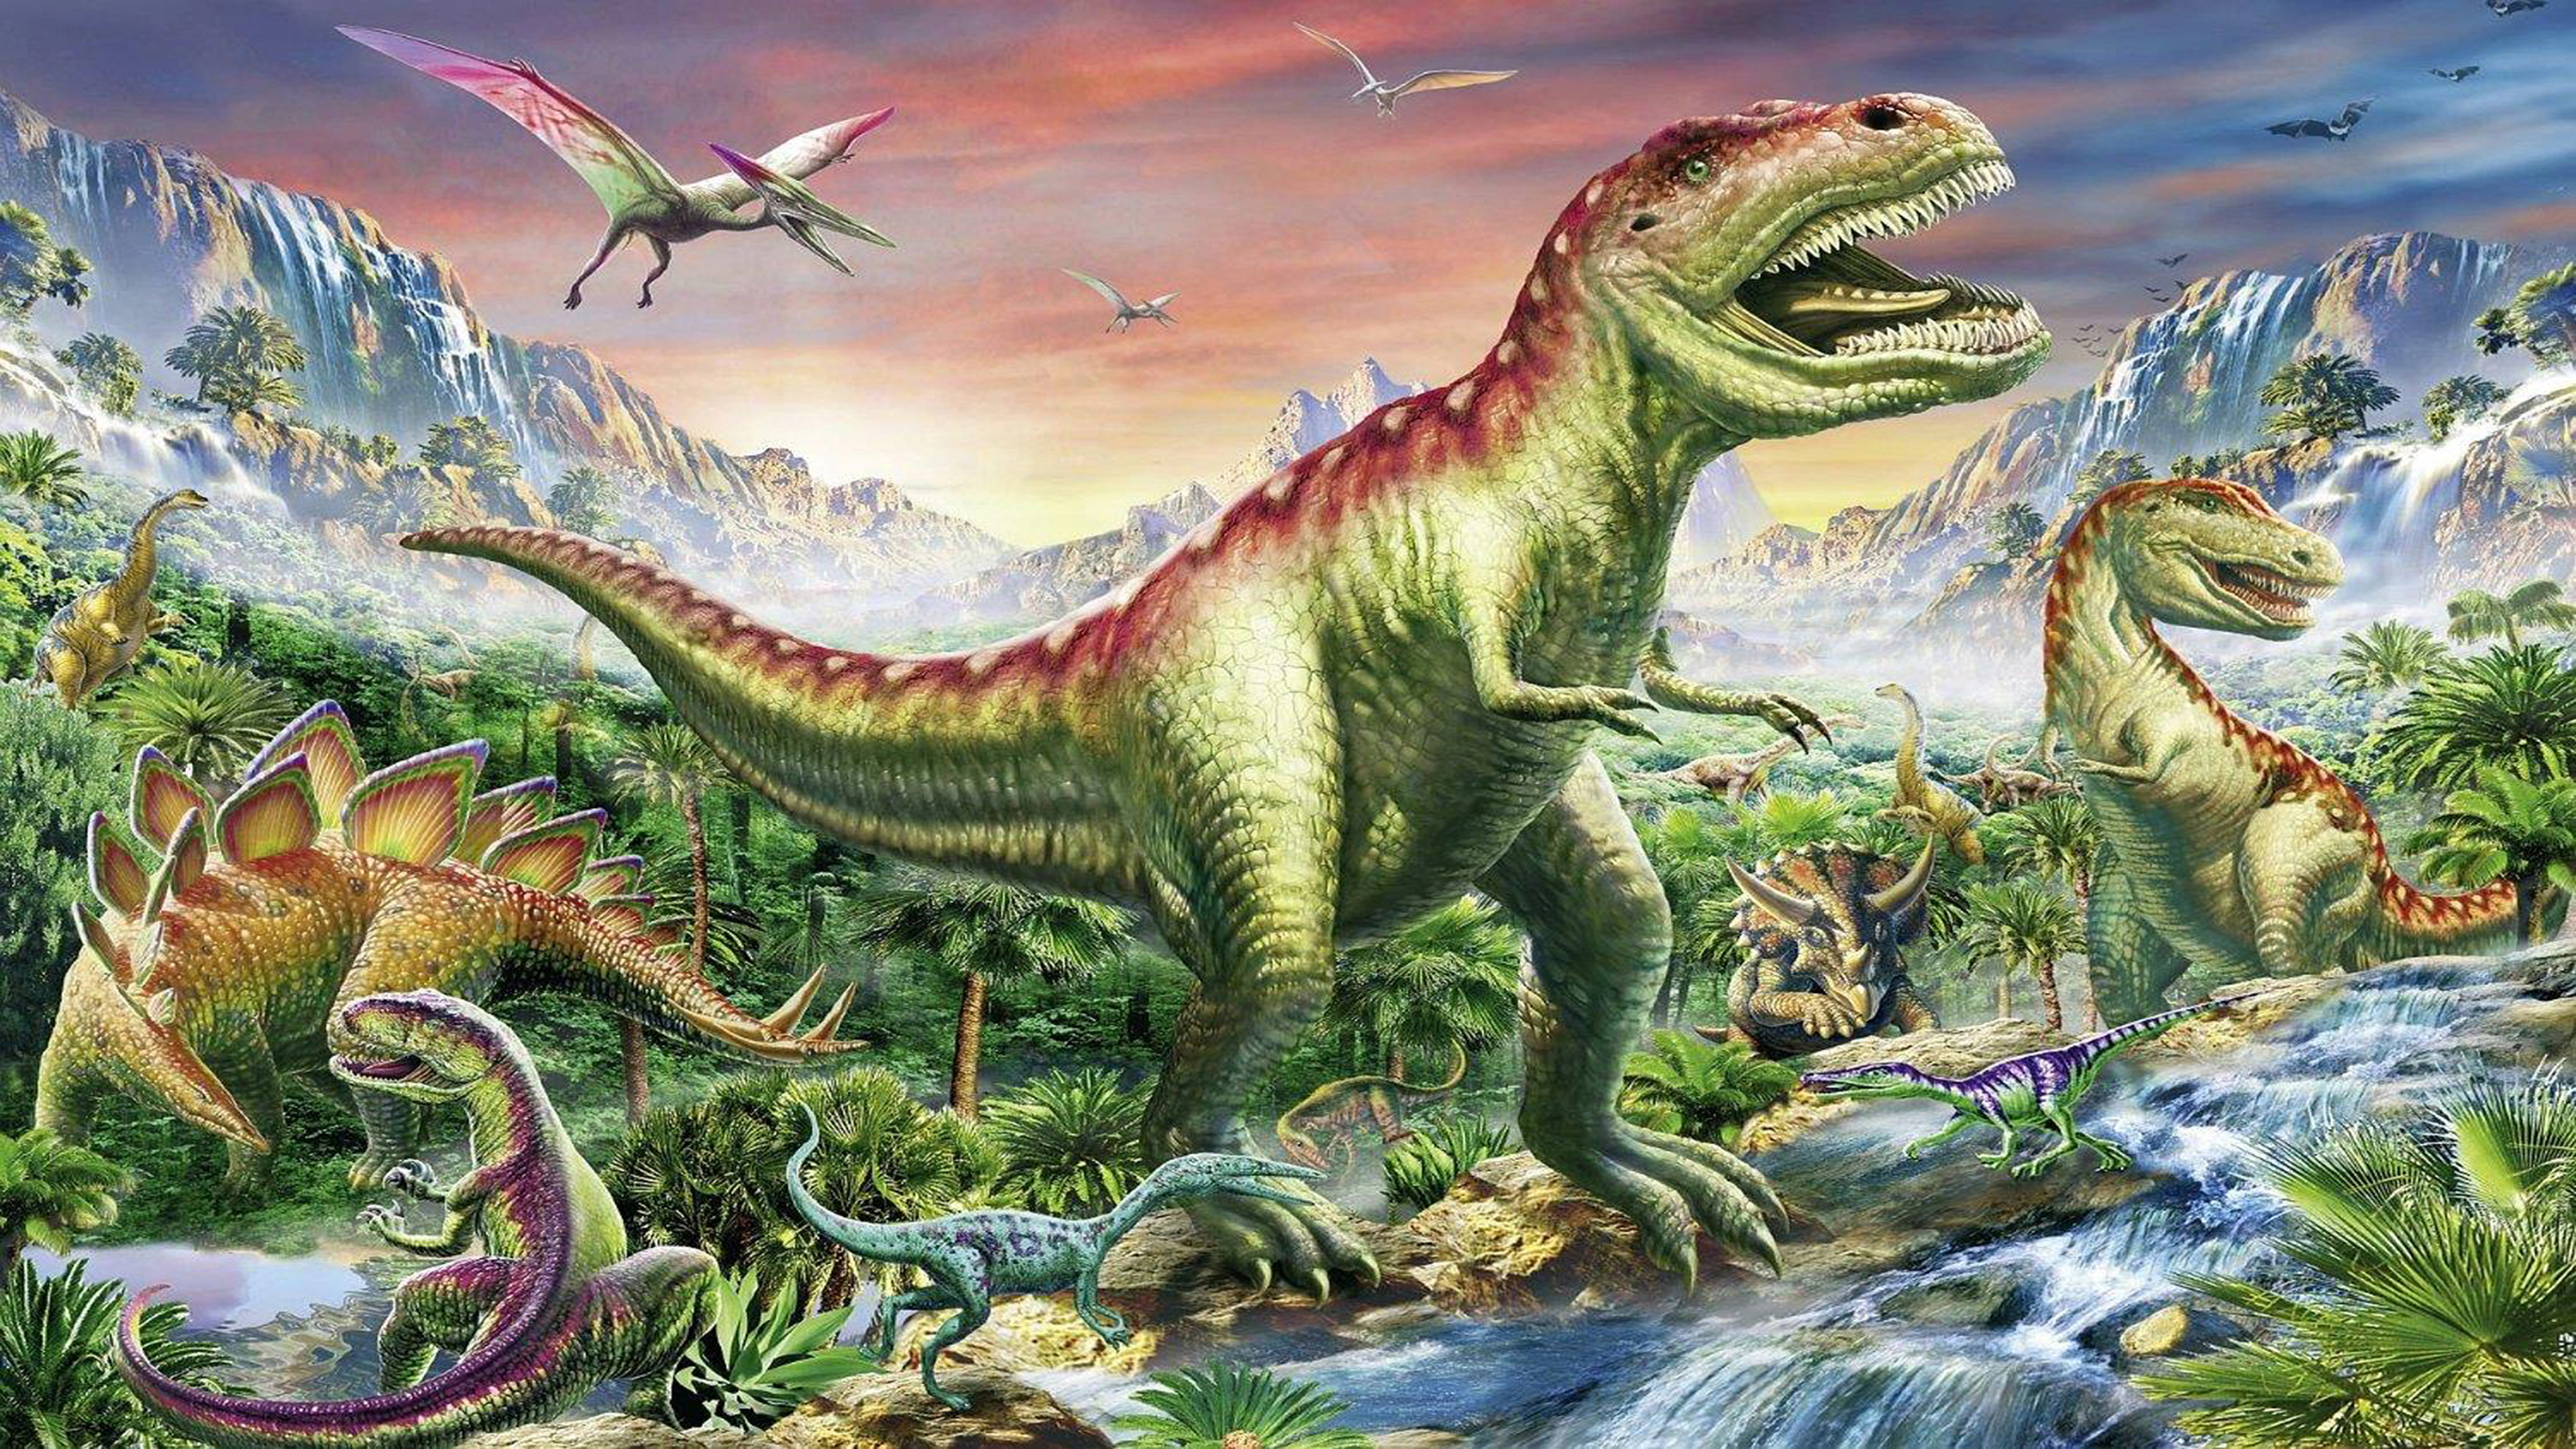 🔥 Download Dinosaurier HD Wallpaper Wallpaper13 by maryp70 Dino